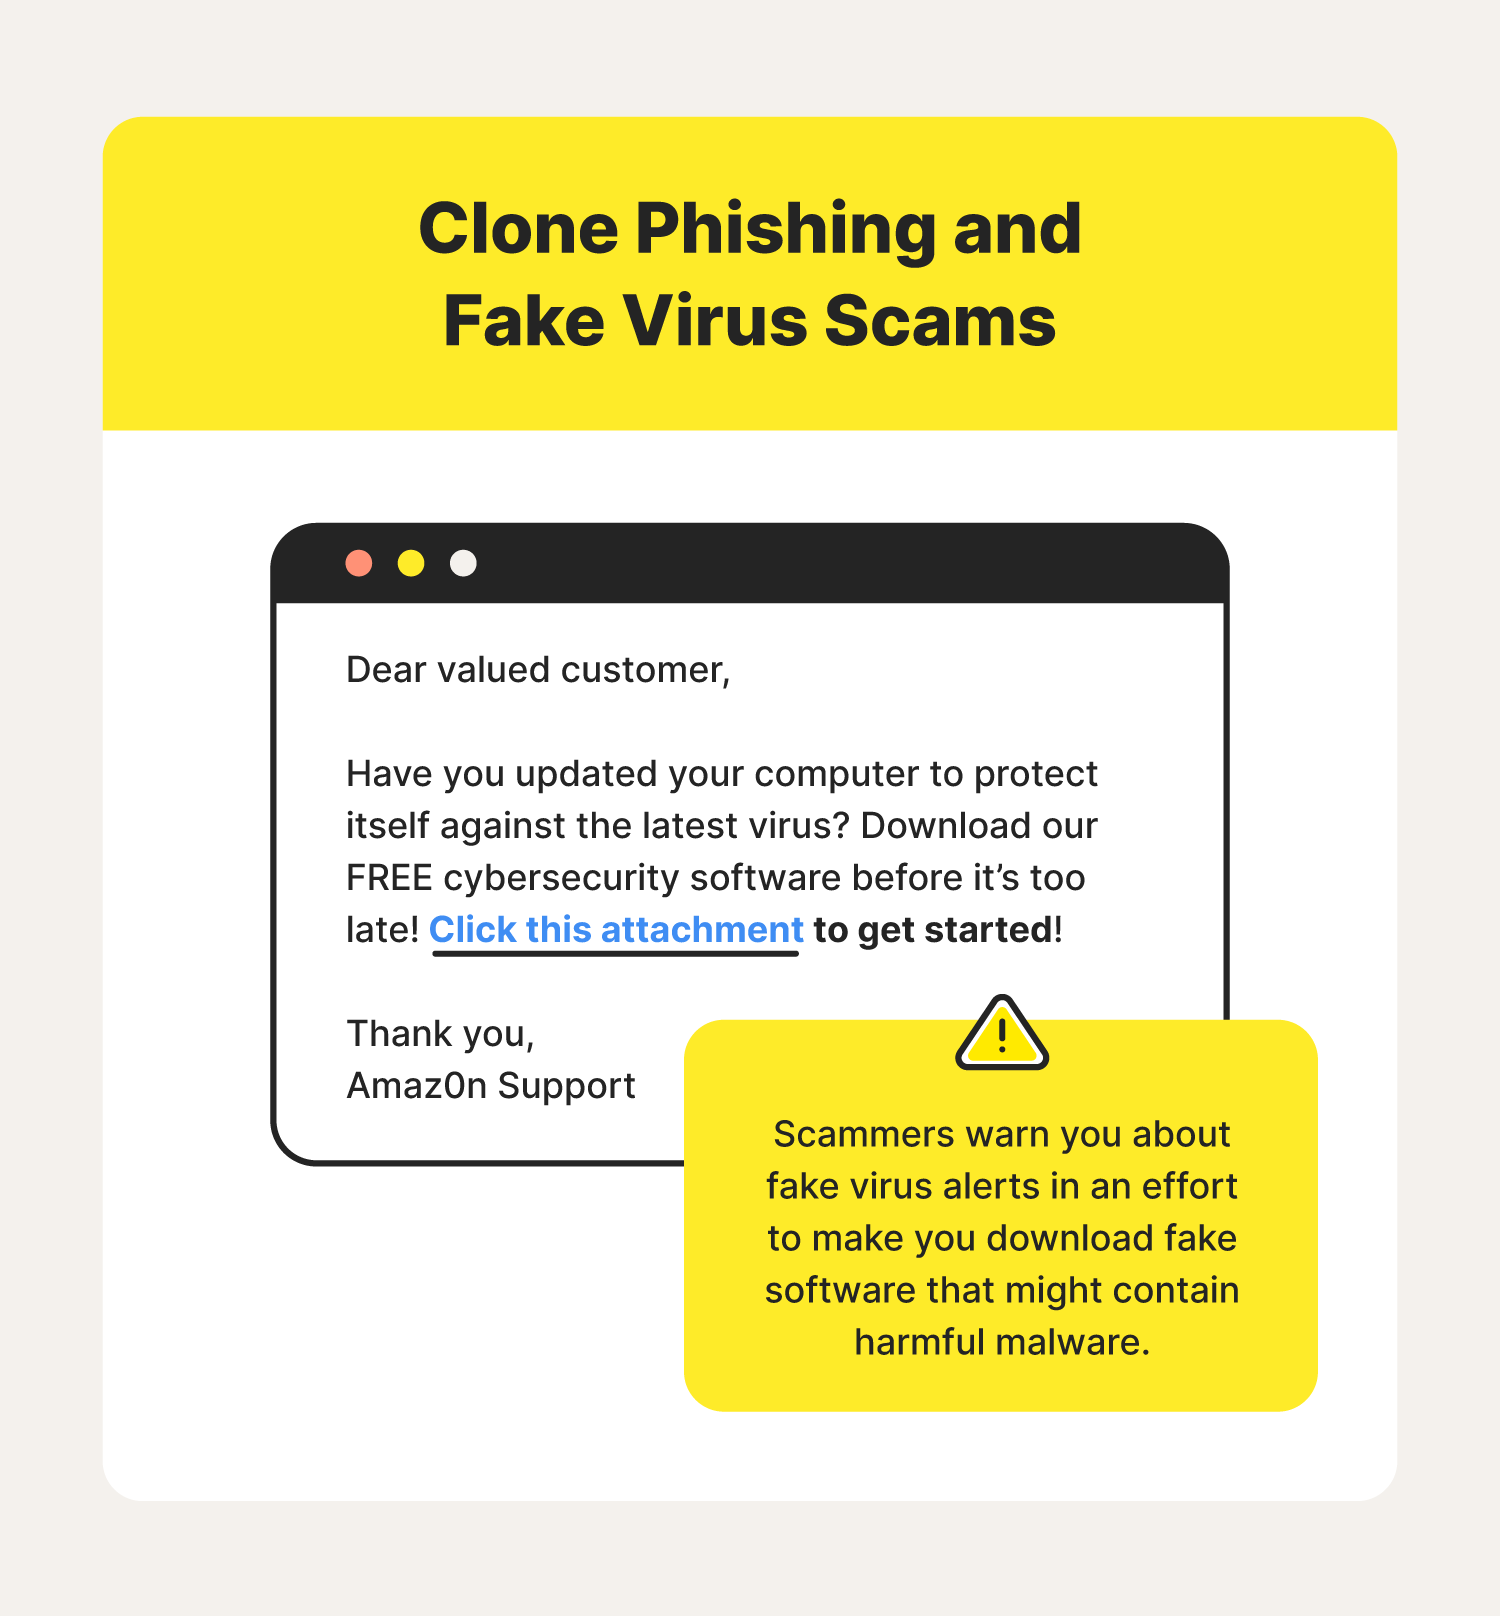 A graphic illustrates an example of a fake virus scam, a popular type of clone phishing.